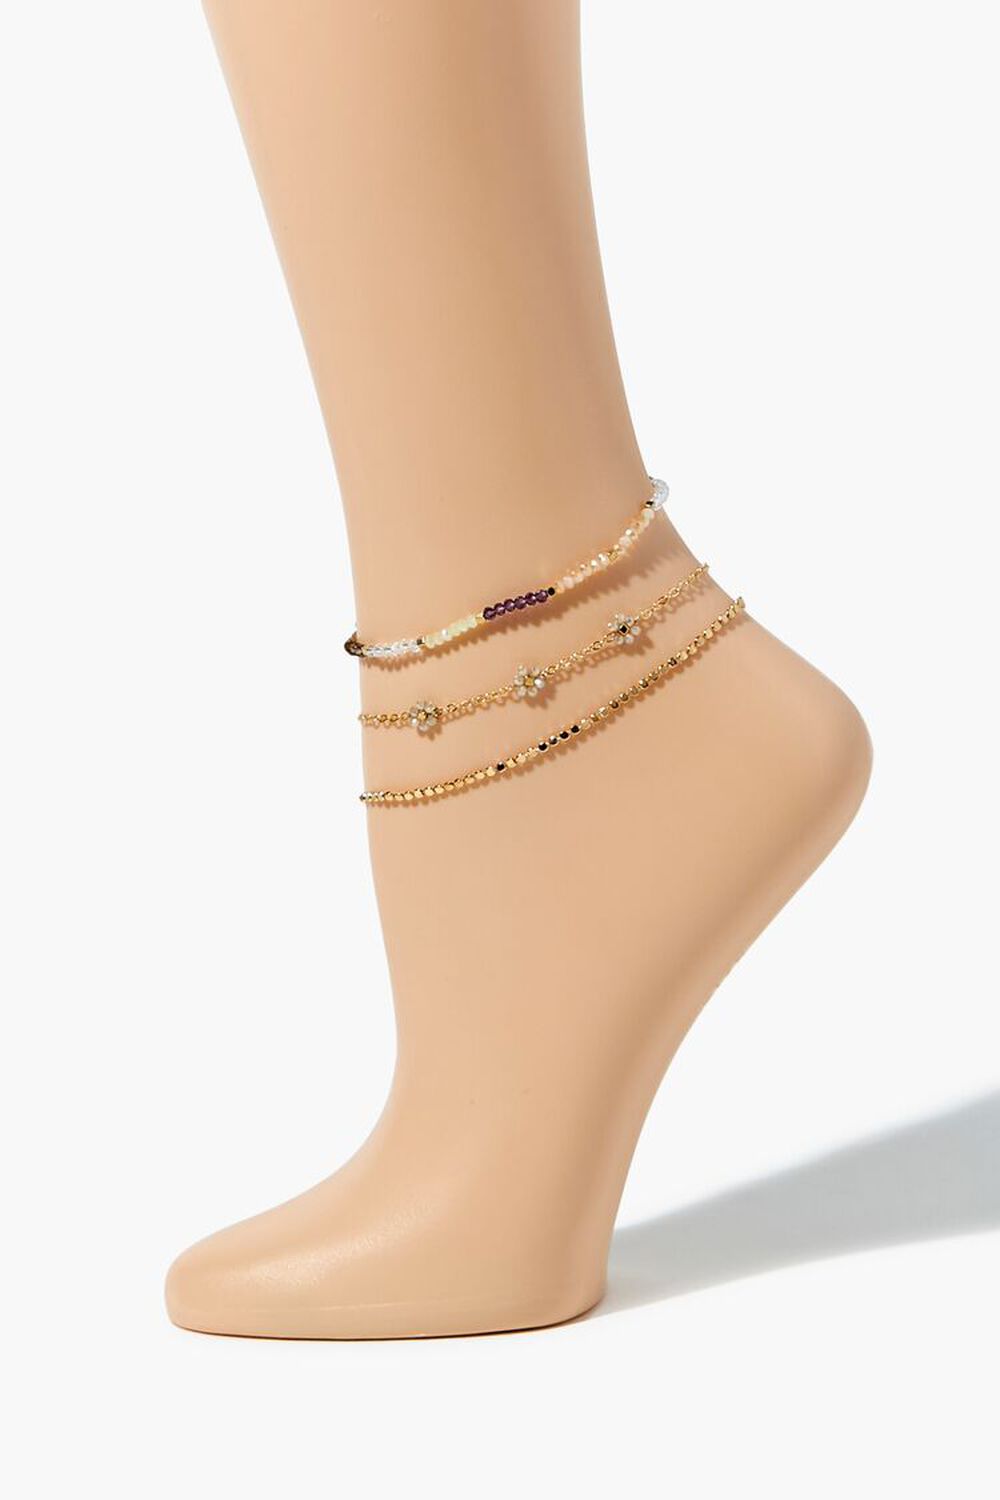 Beaded Floral Chain Anklet Set, image 2